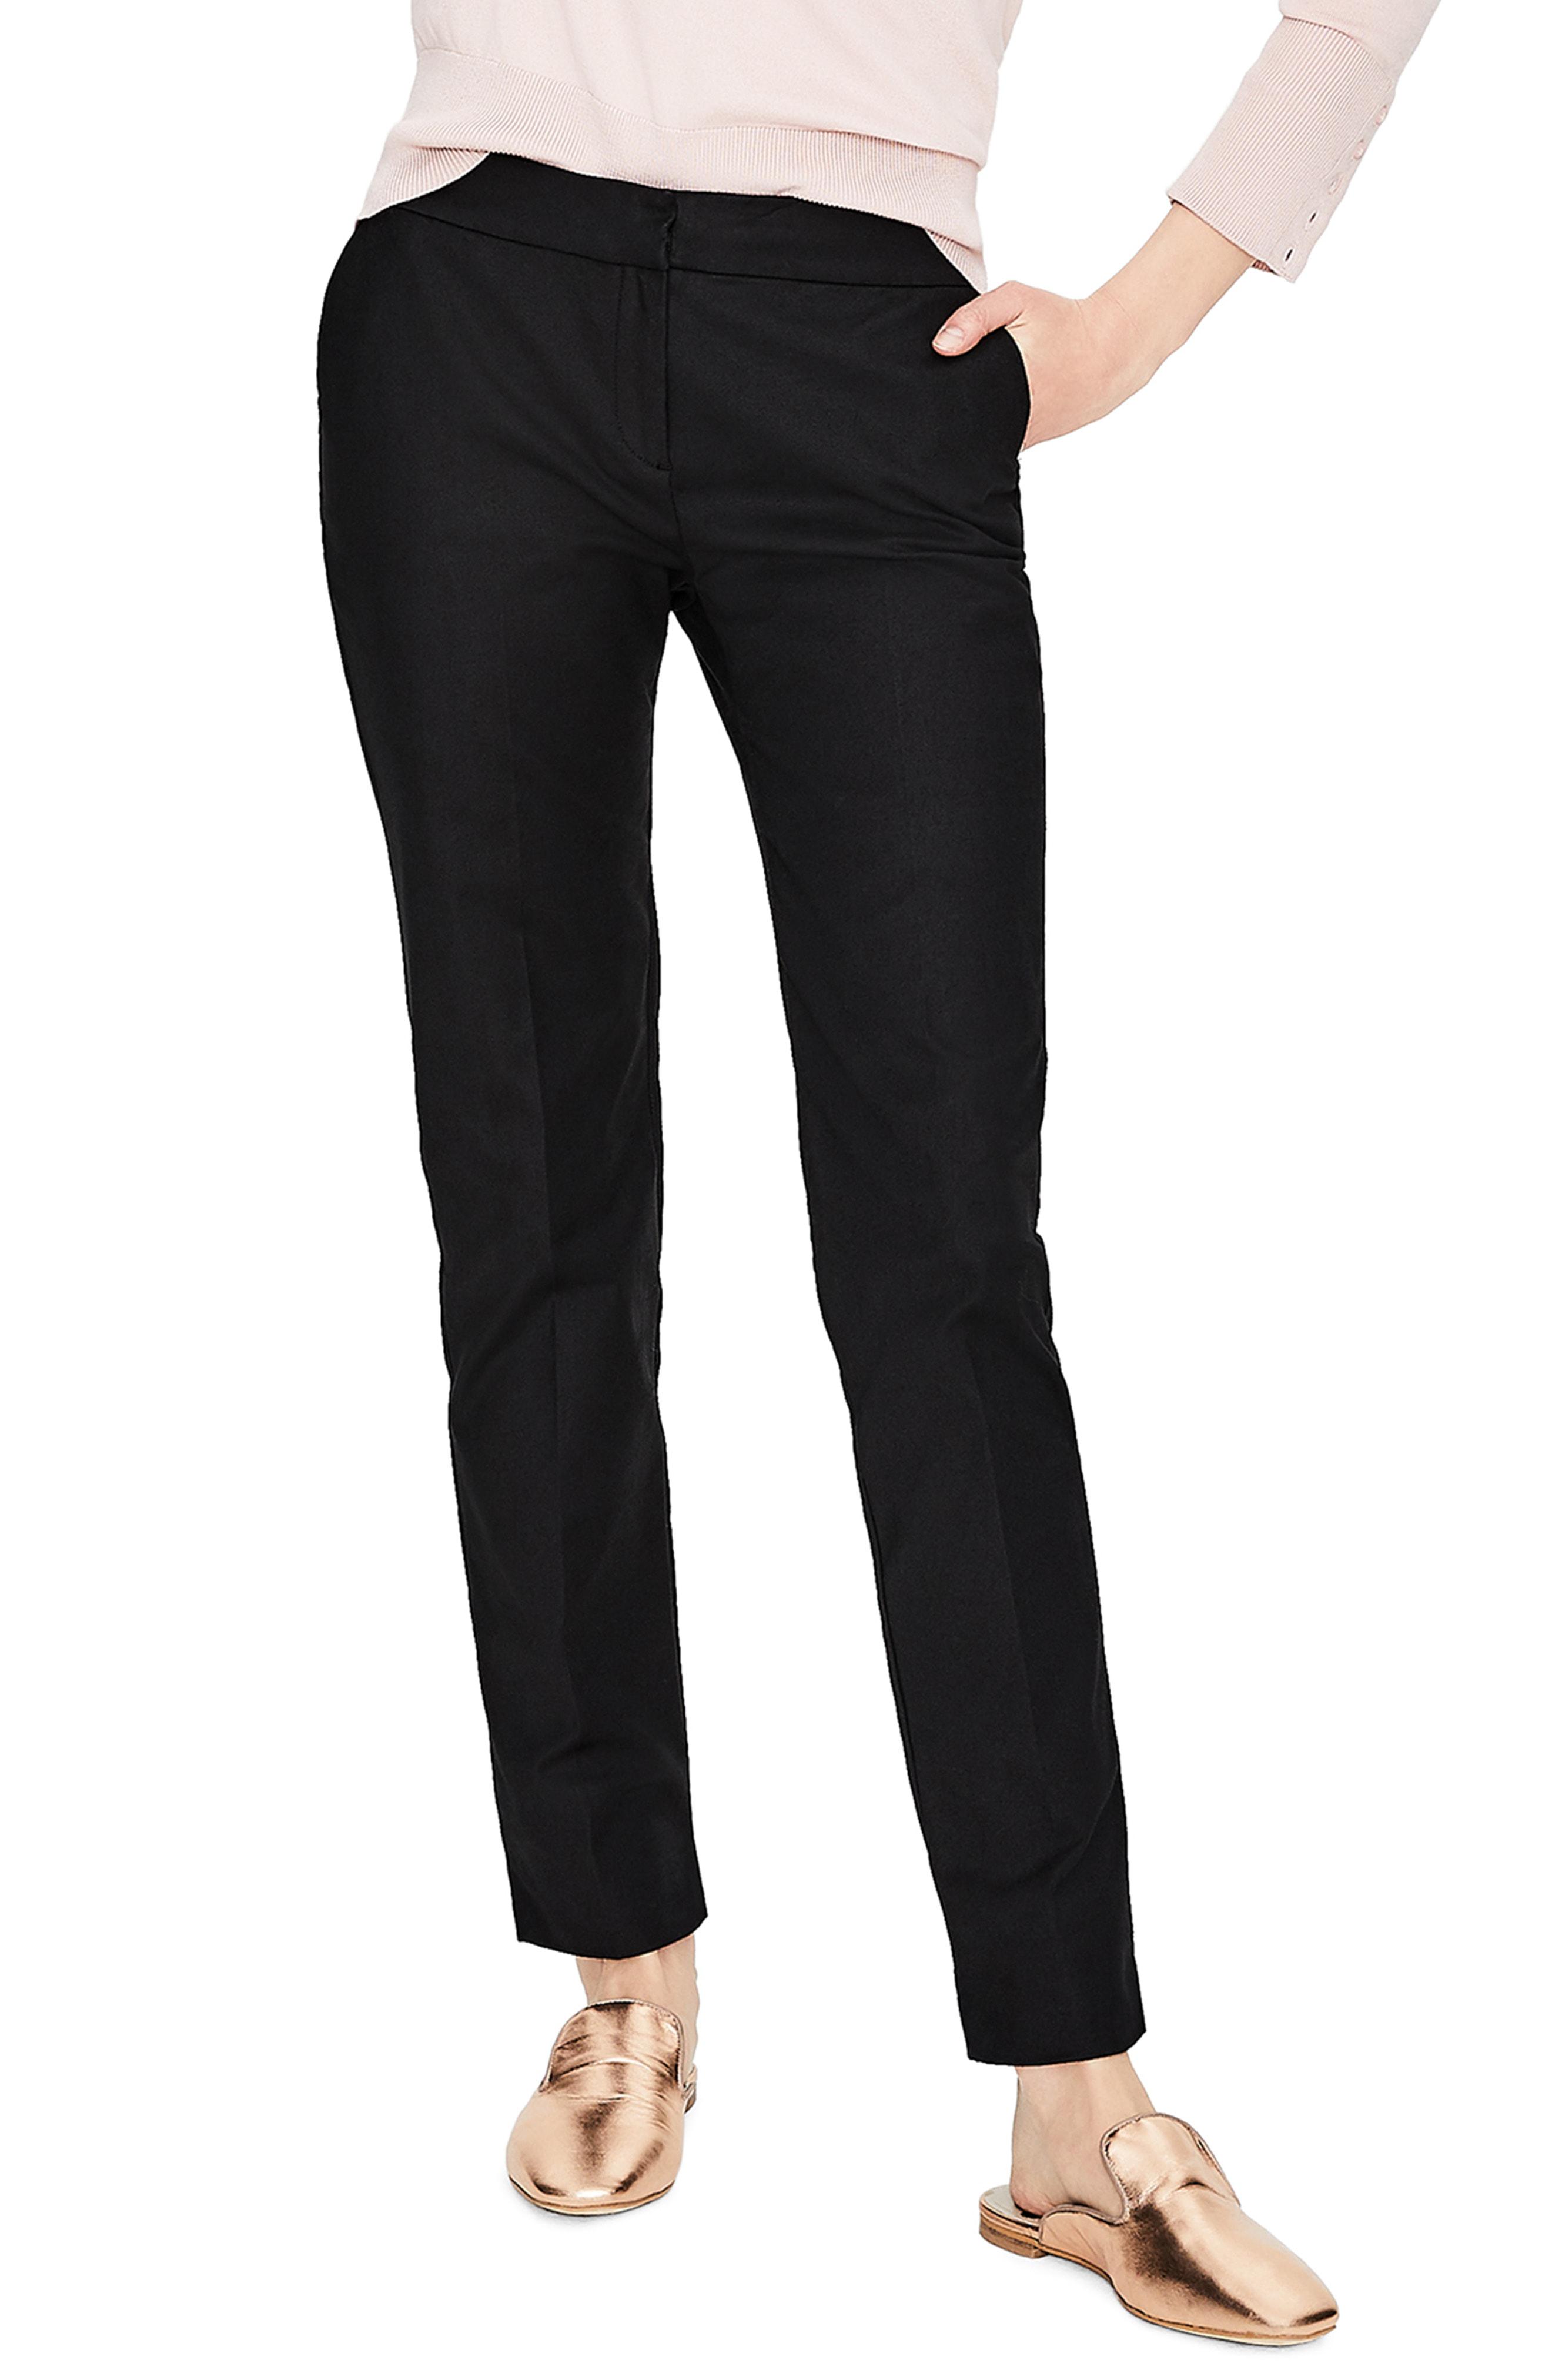 Boden Richmond Stretch Cotton Trousers in Black - Lyst